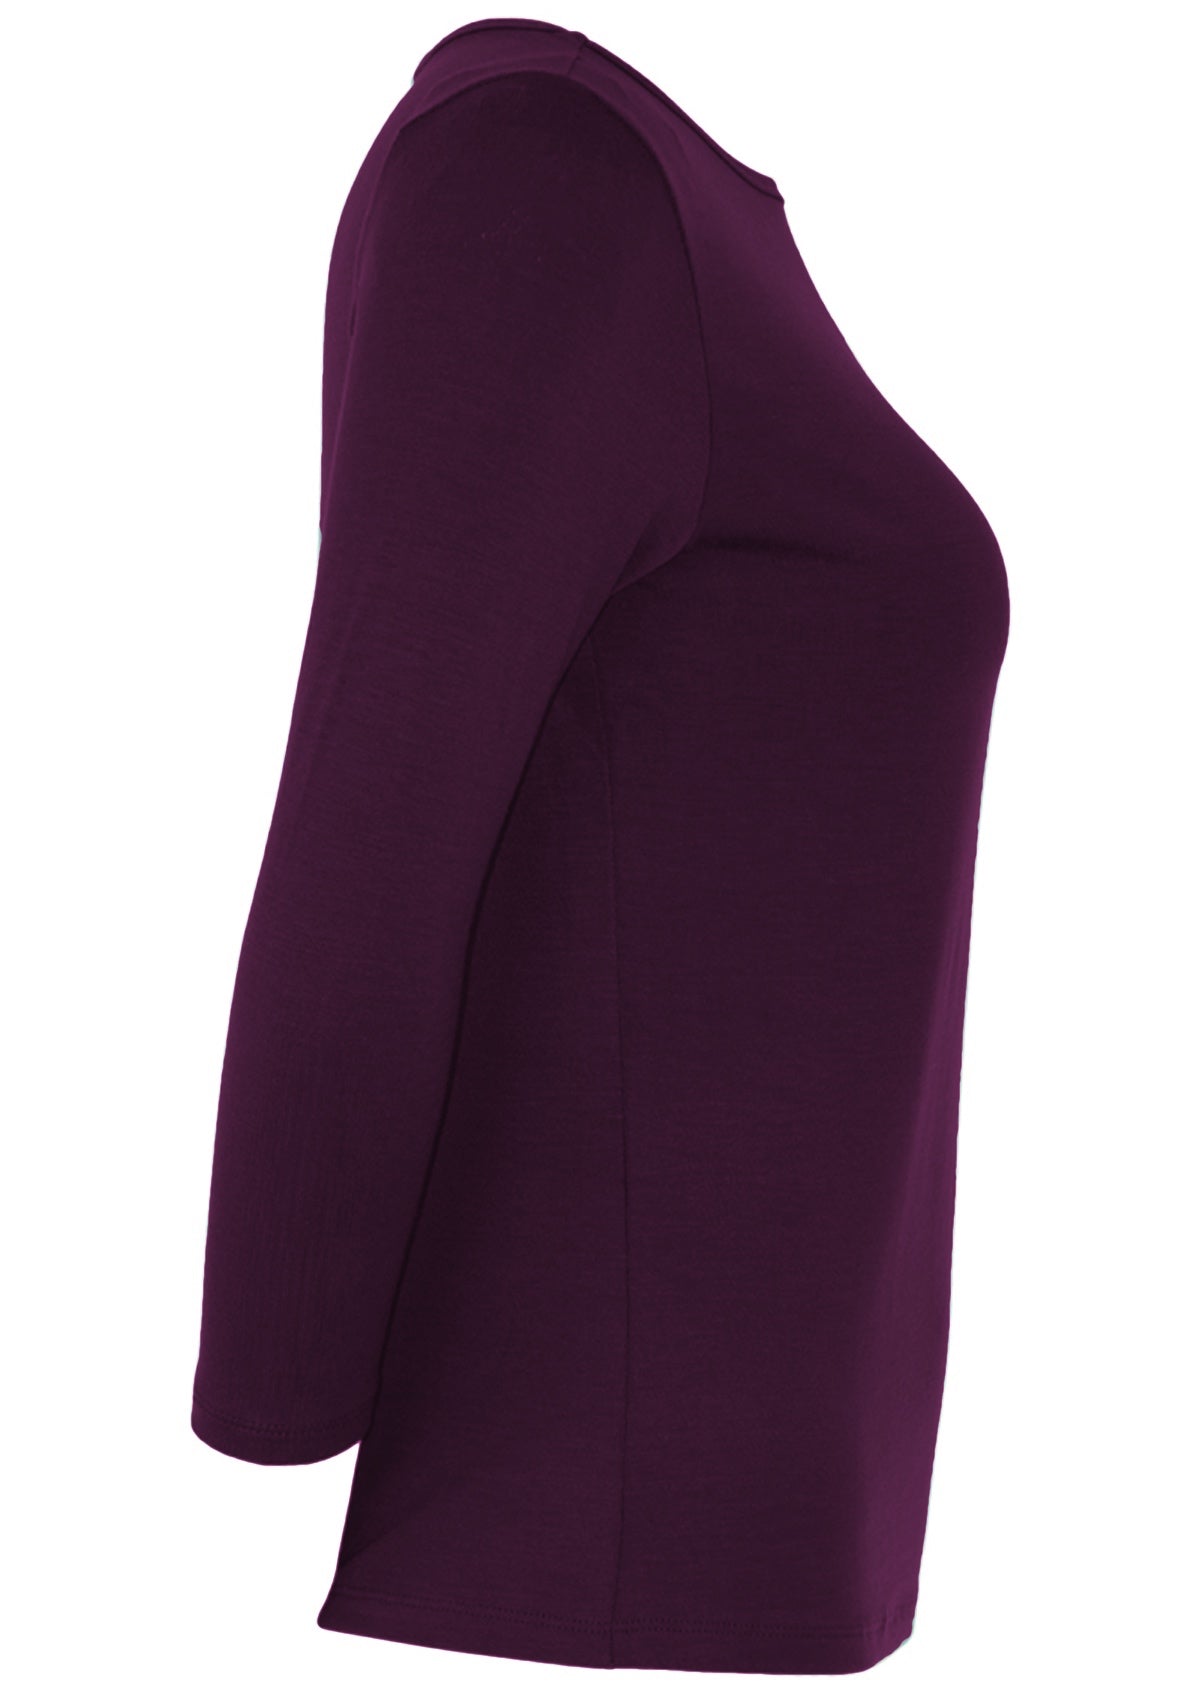 Side view of women's rayon boat neck purple 3/4 sleeve top.